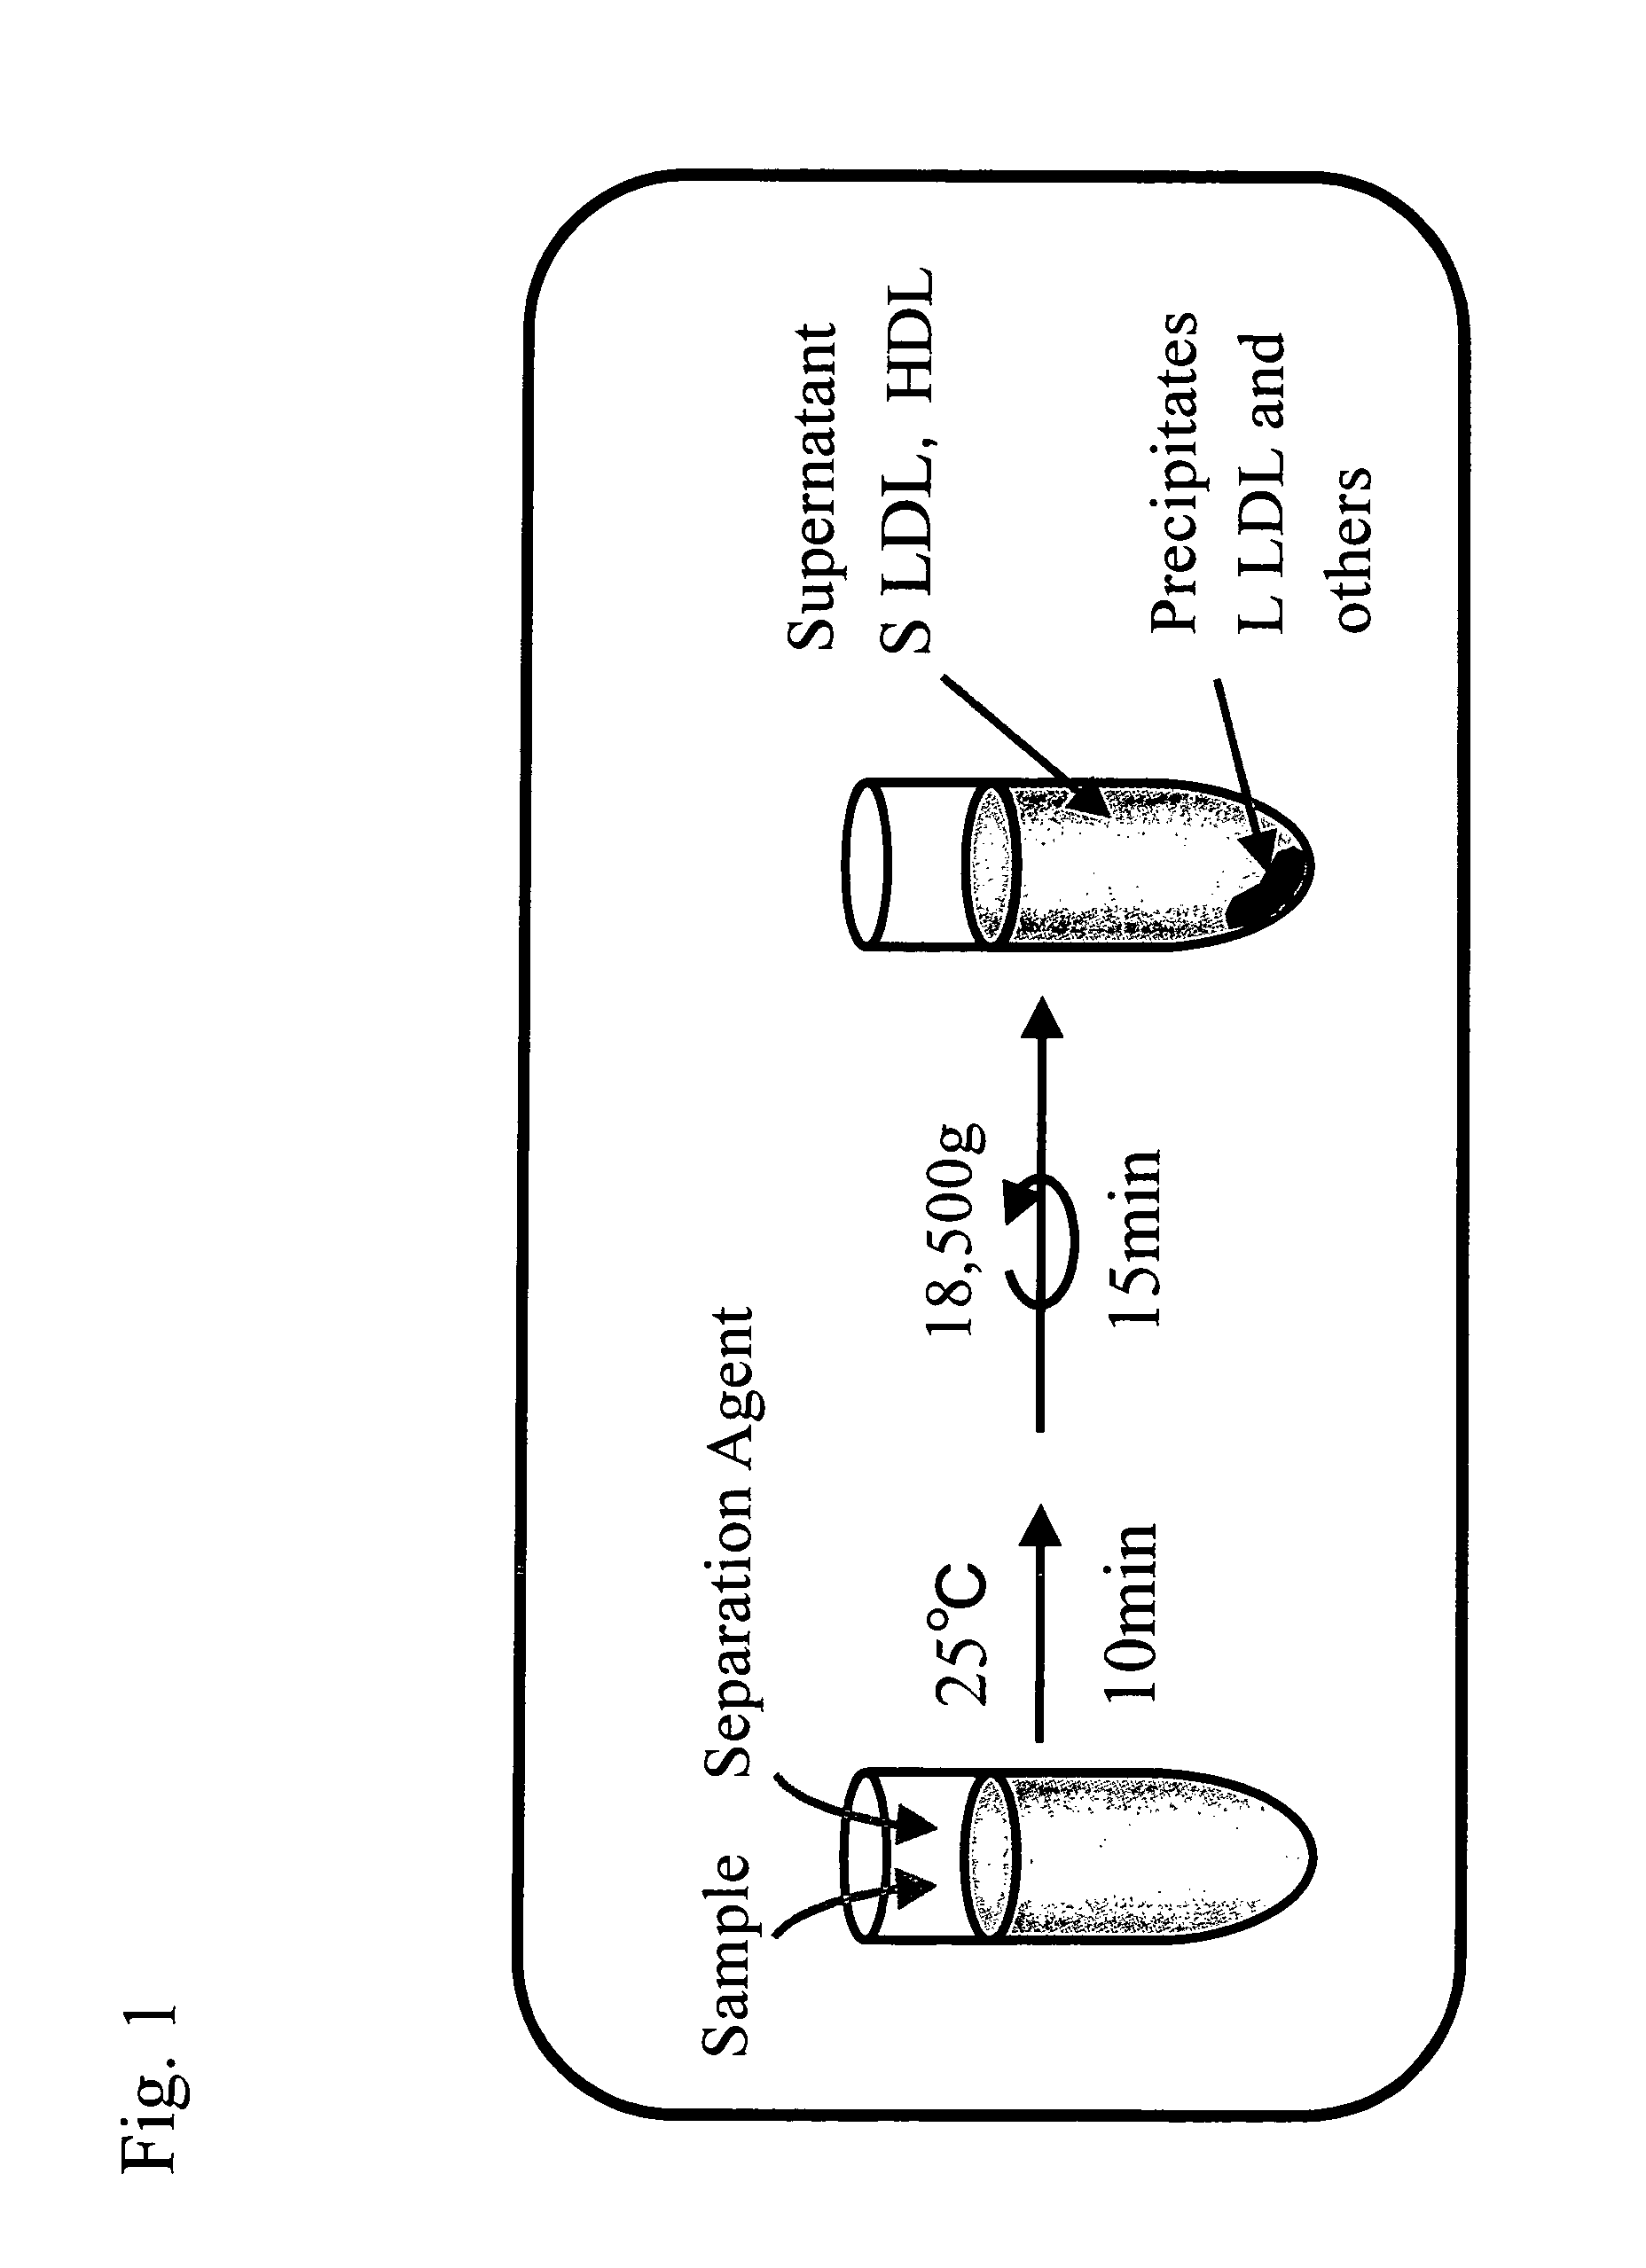 Method of quantifying small-sized low density lipoprotein